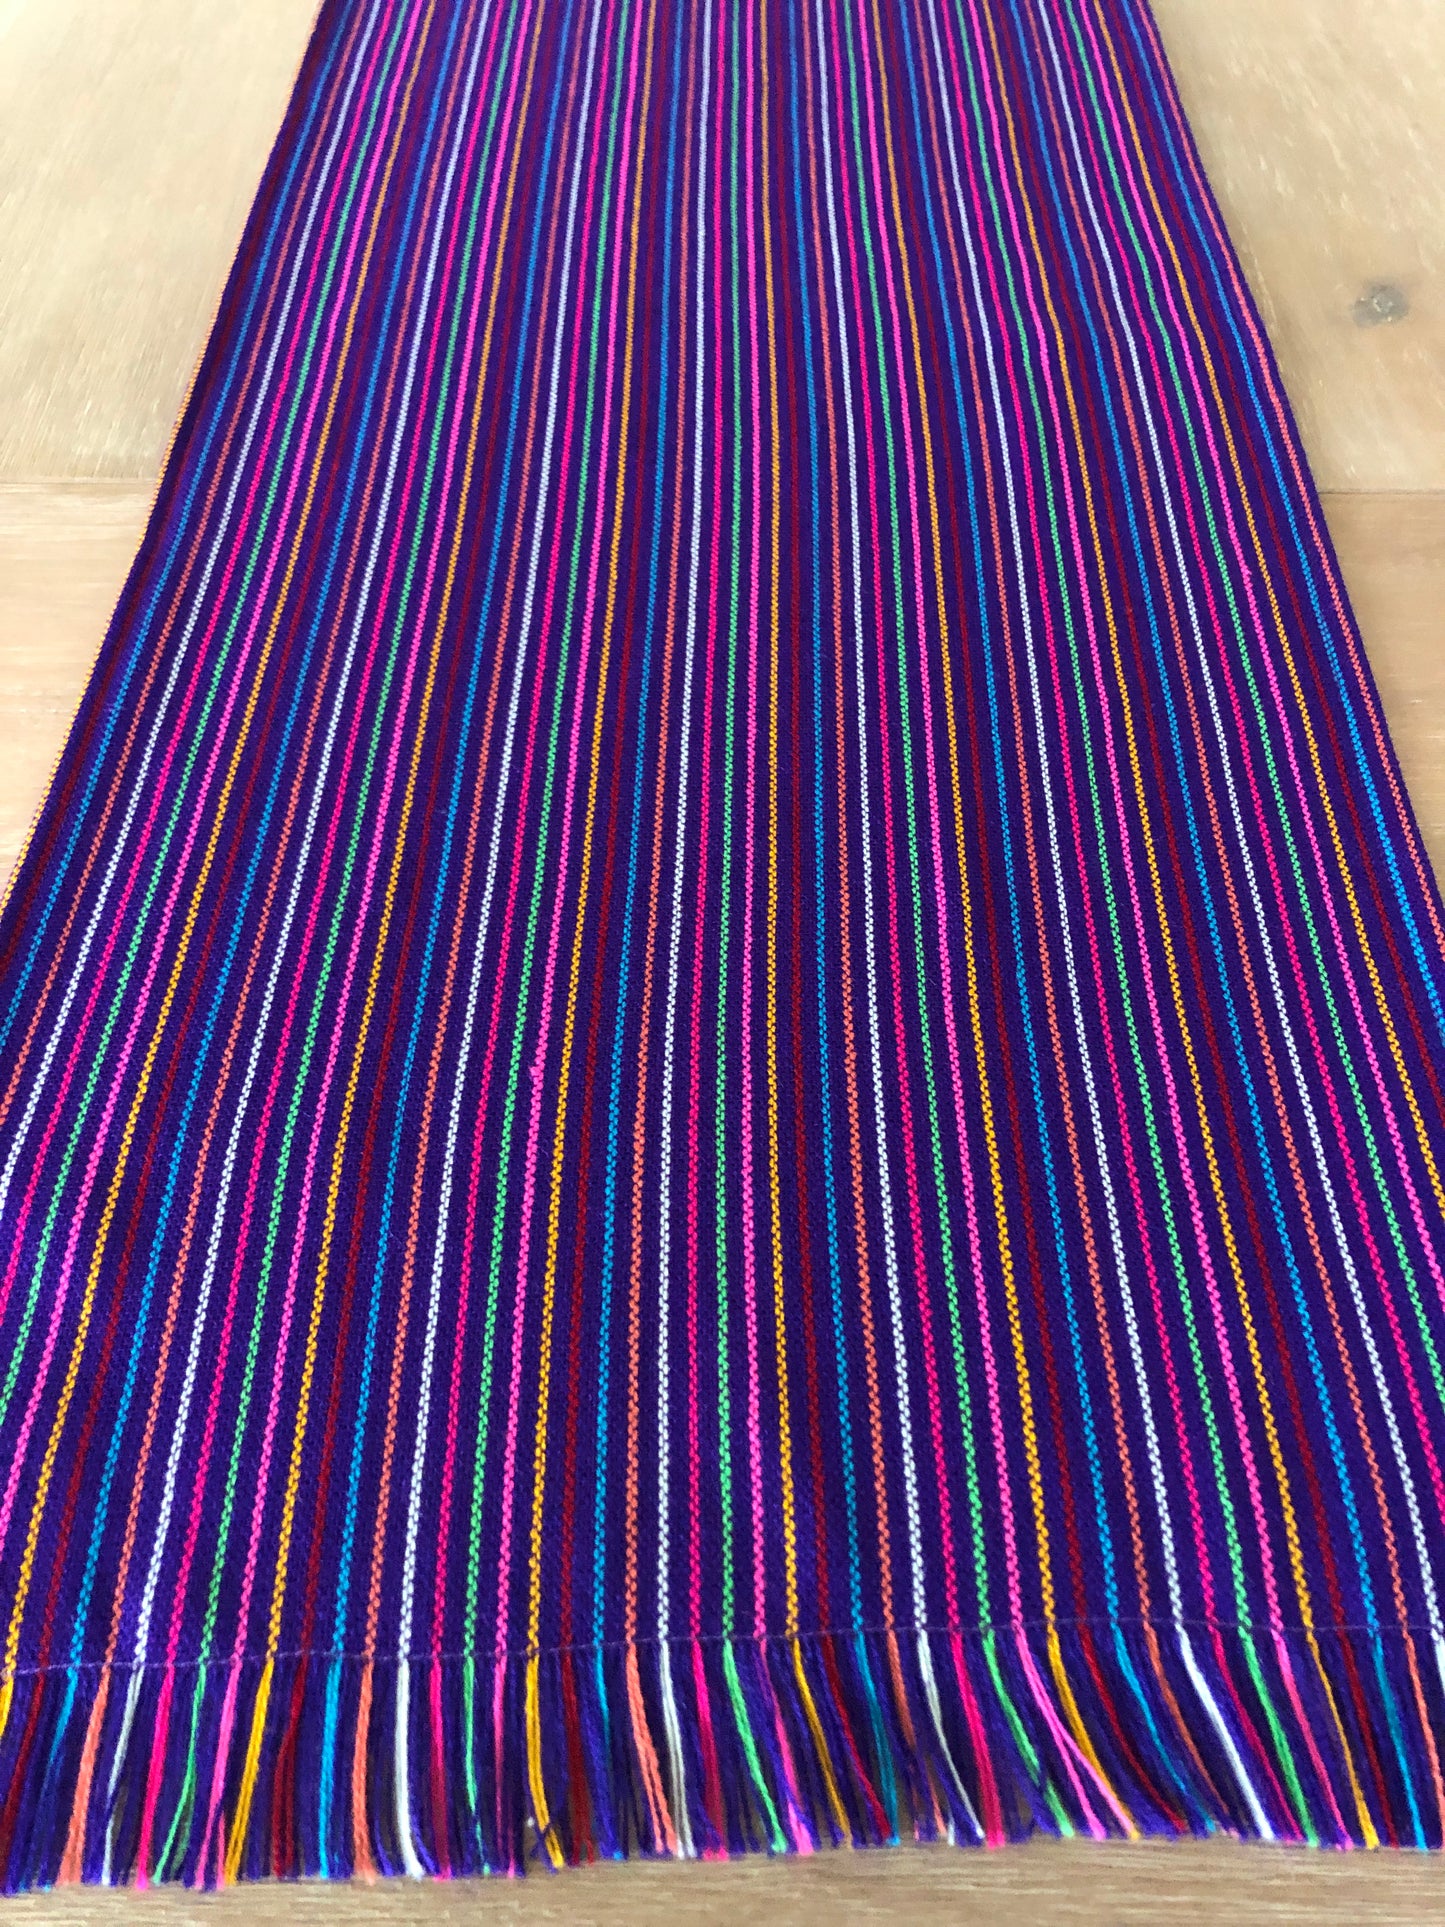 Mexican Fiesta Table Runner or Tablecloth -Purple striped